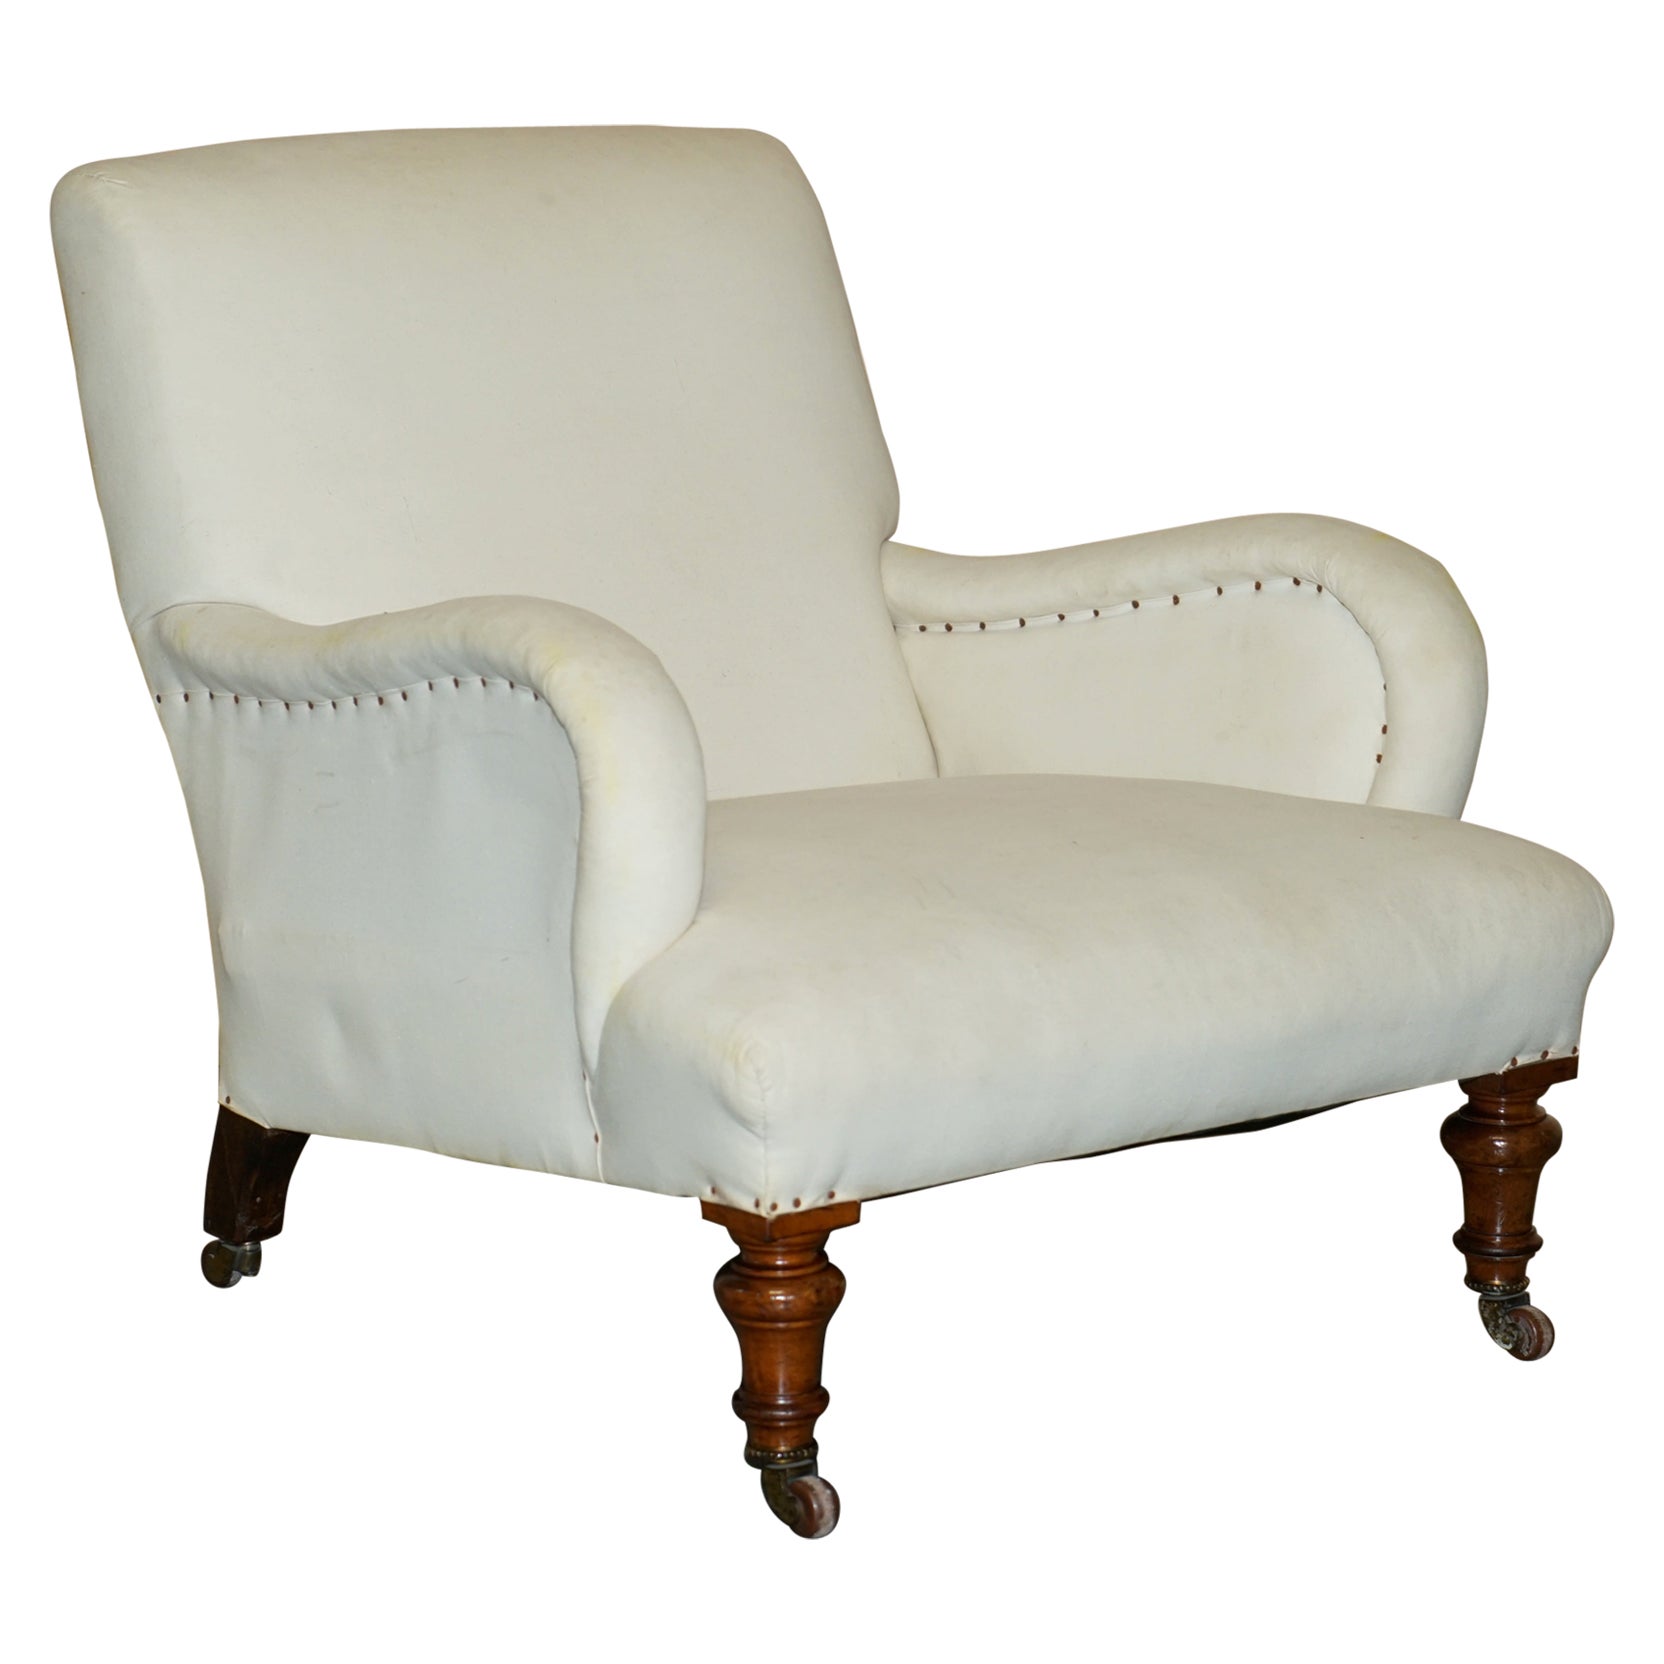 ANTIQUE ViCTORIAN HOWARD & SON'S BRIDGEWATER STYLE ARMCHAIR NICELY SCULPTED ARMs